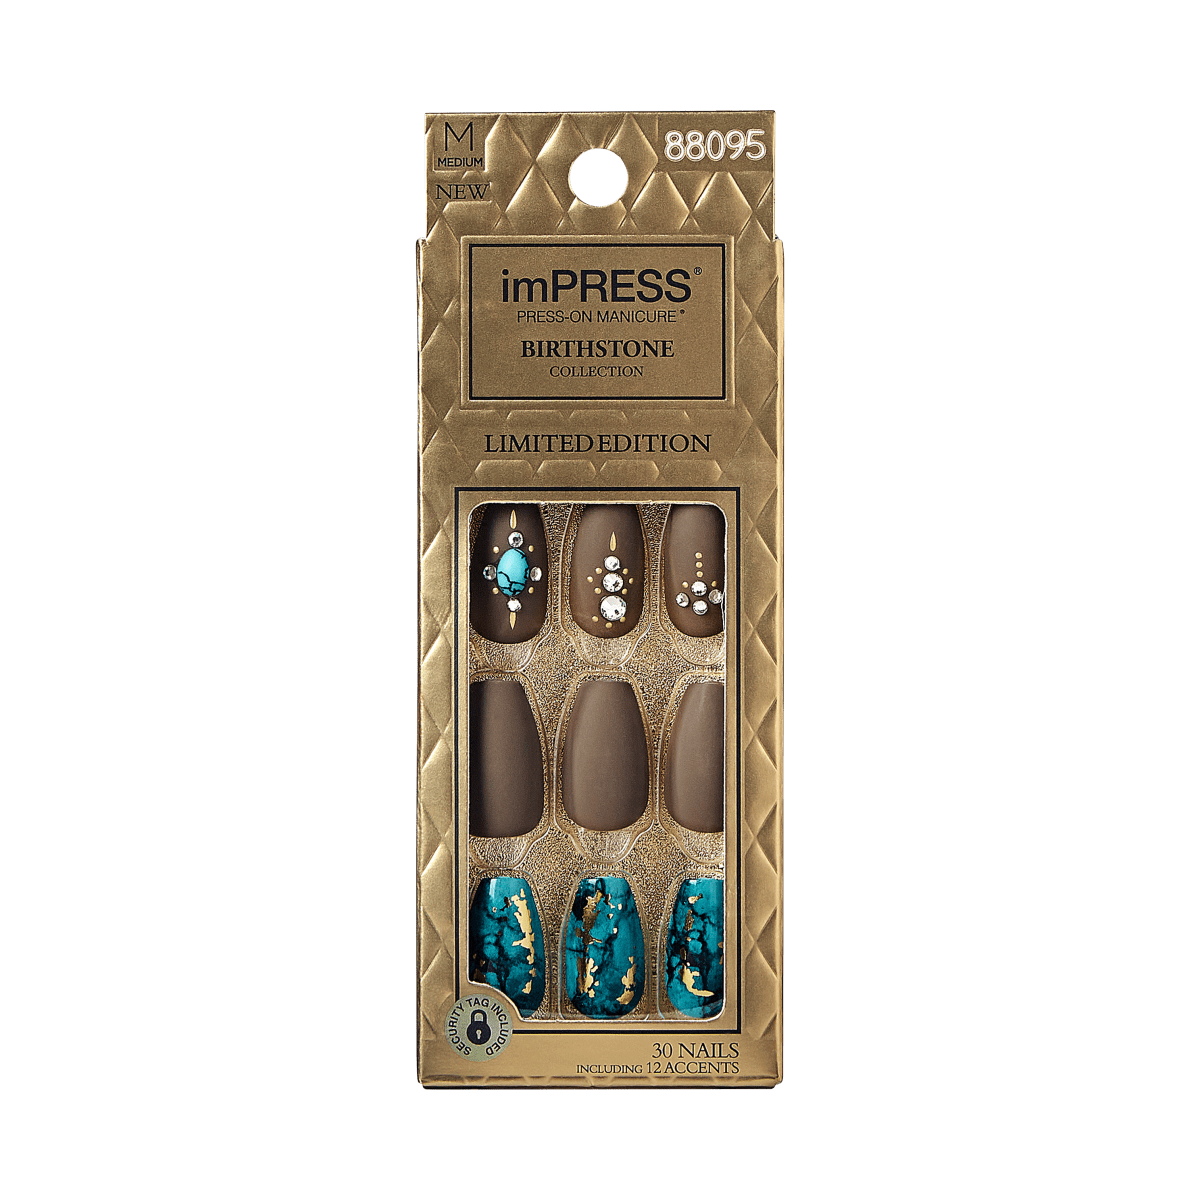 imPRESS Press-on Manicure Birthstone Collection - Turquoise